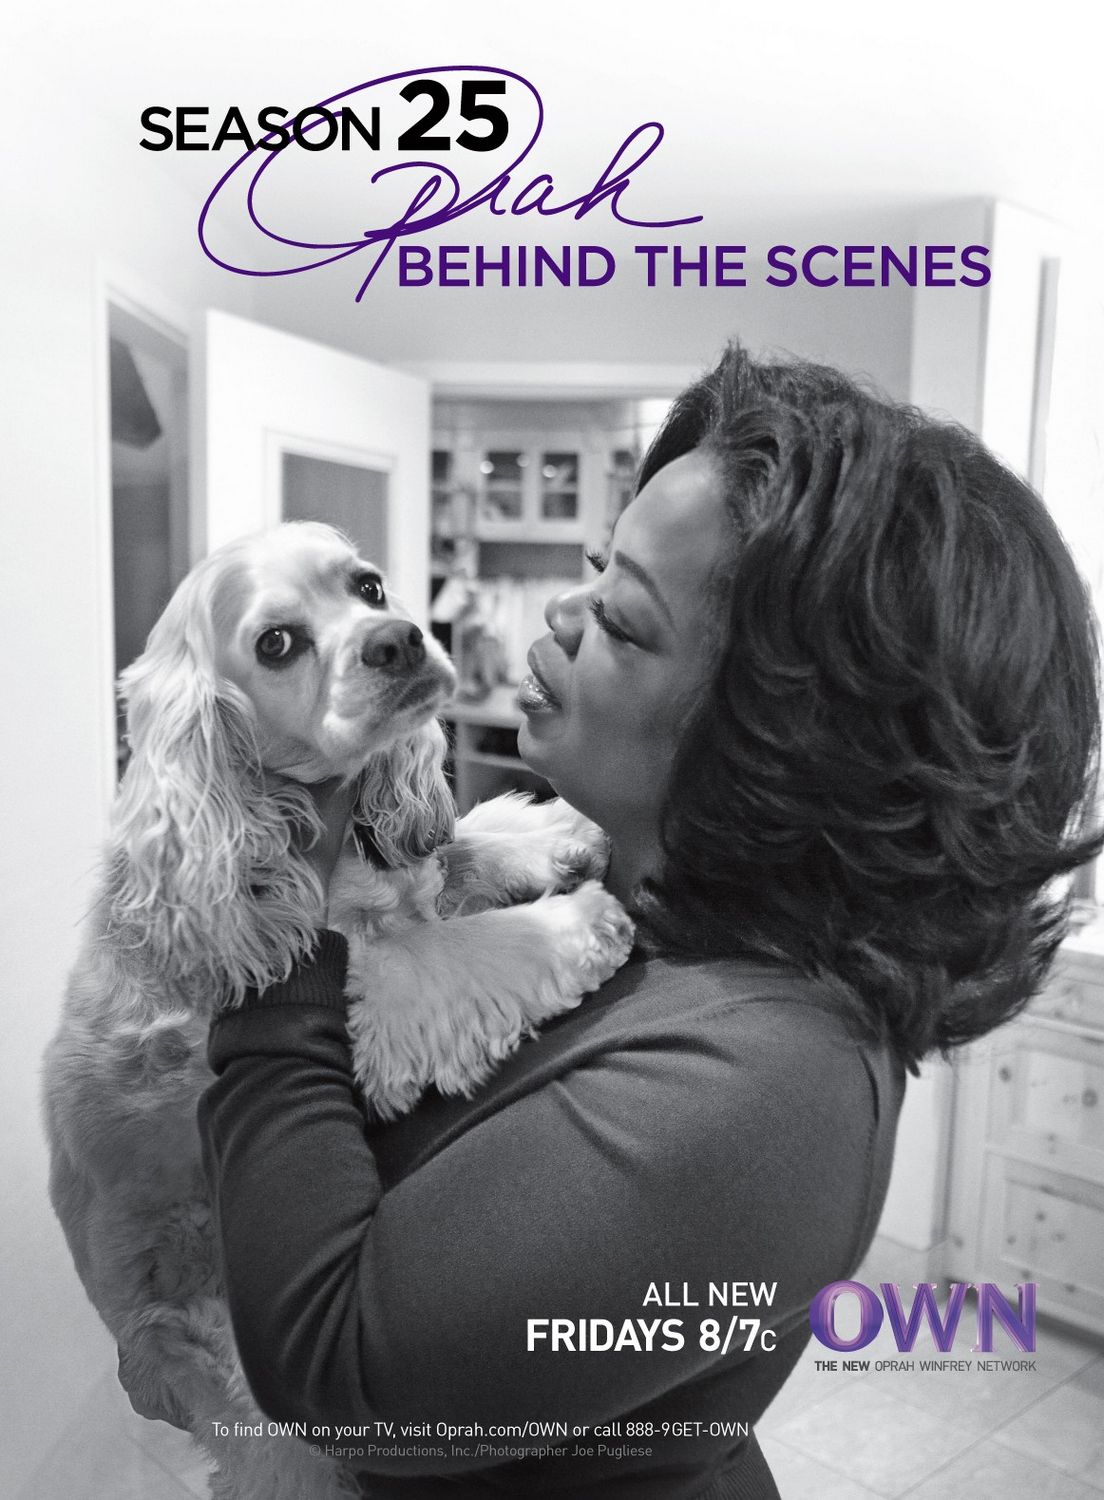 Extra Large TV Poster Image for Season 25: Oprah Behind the Scenes 